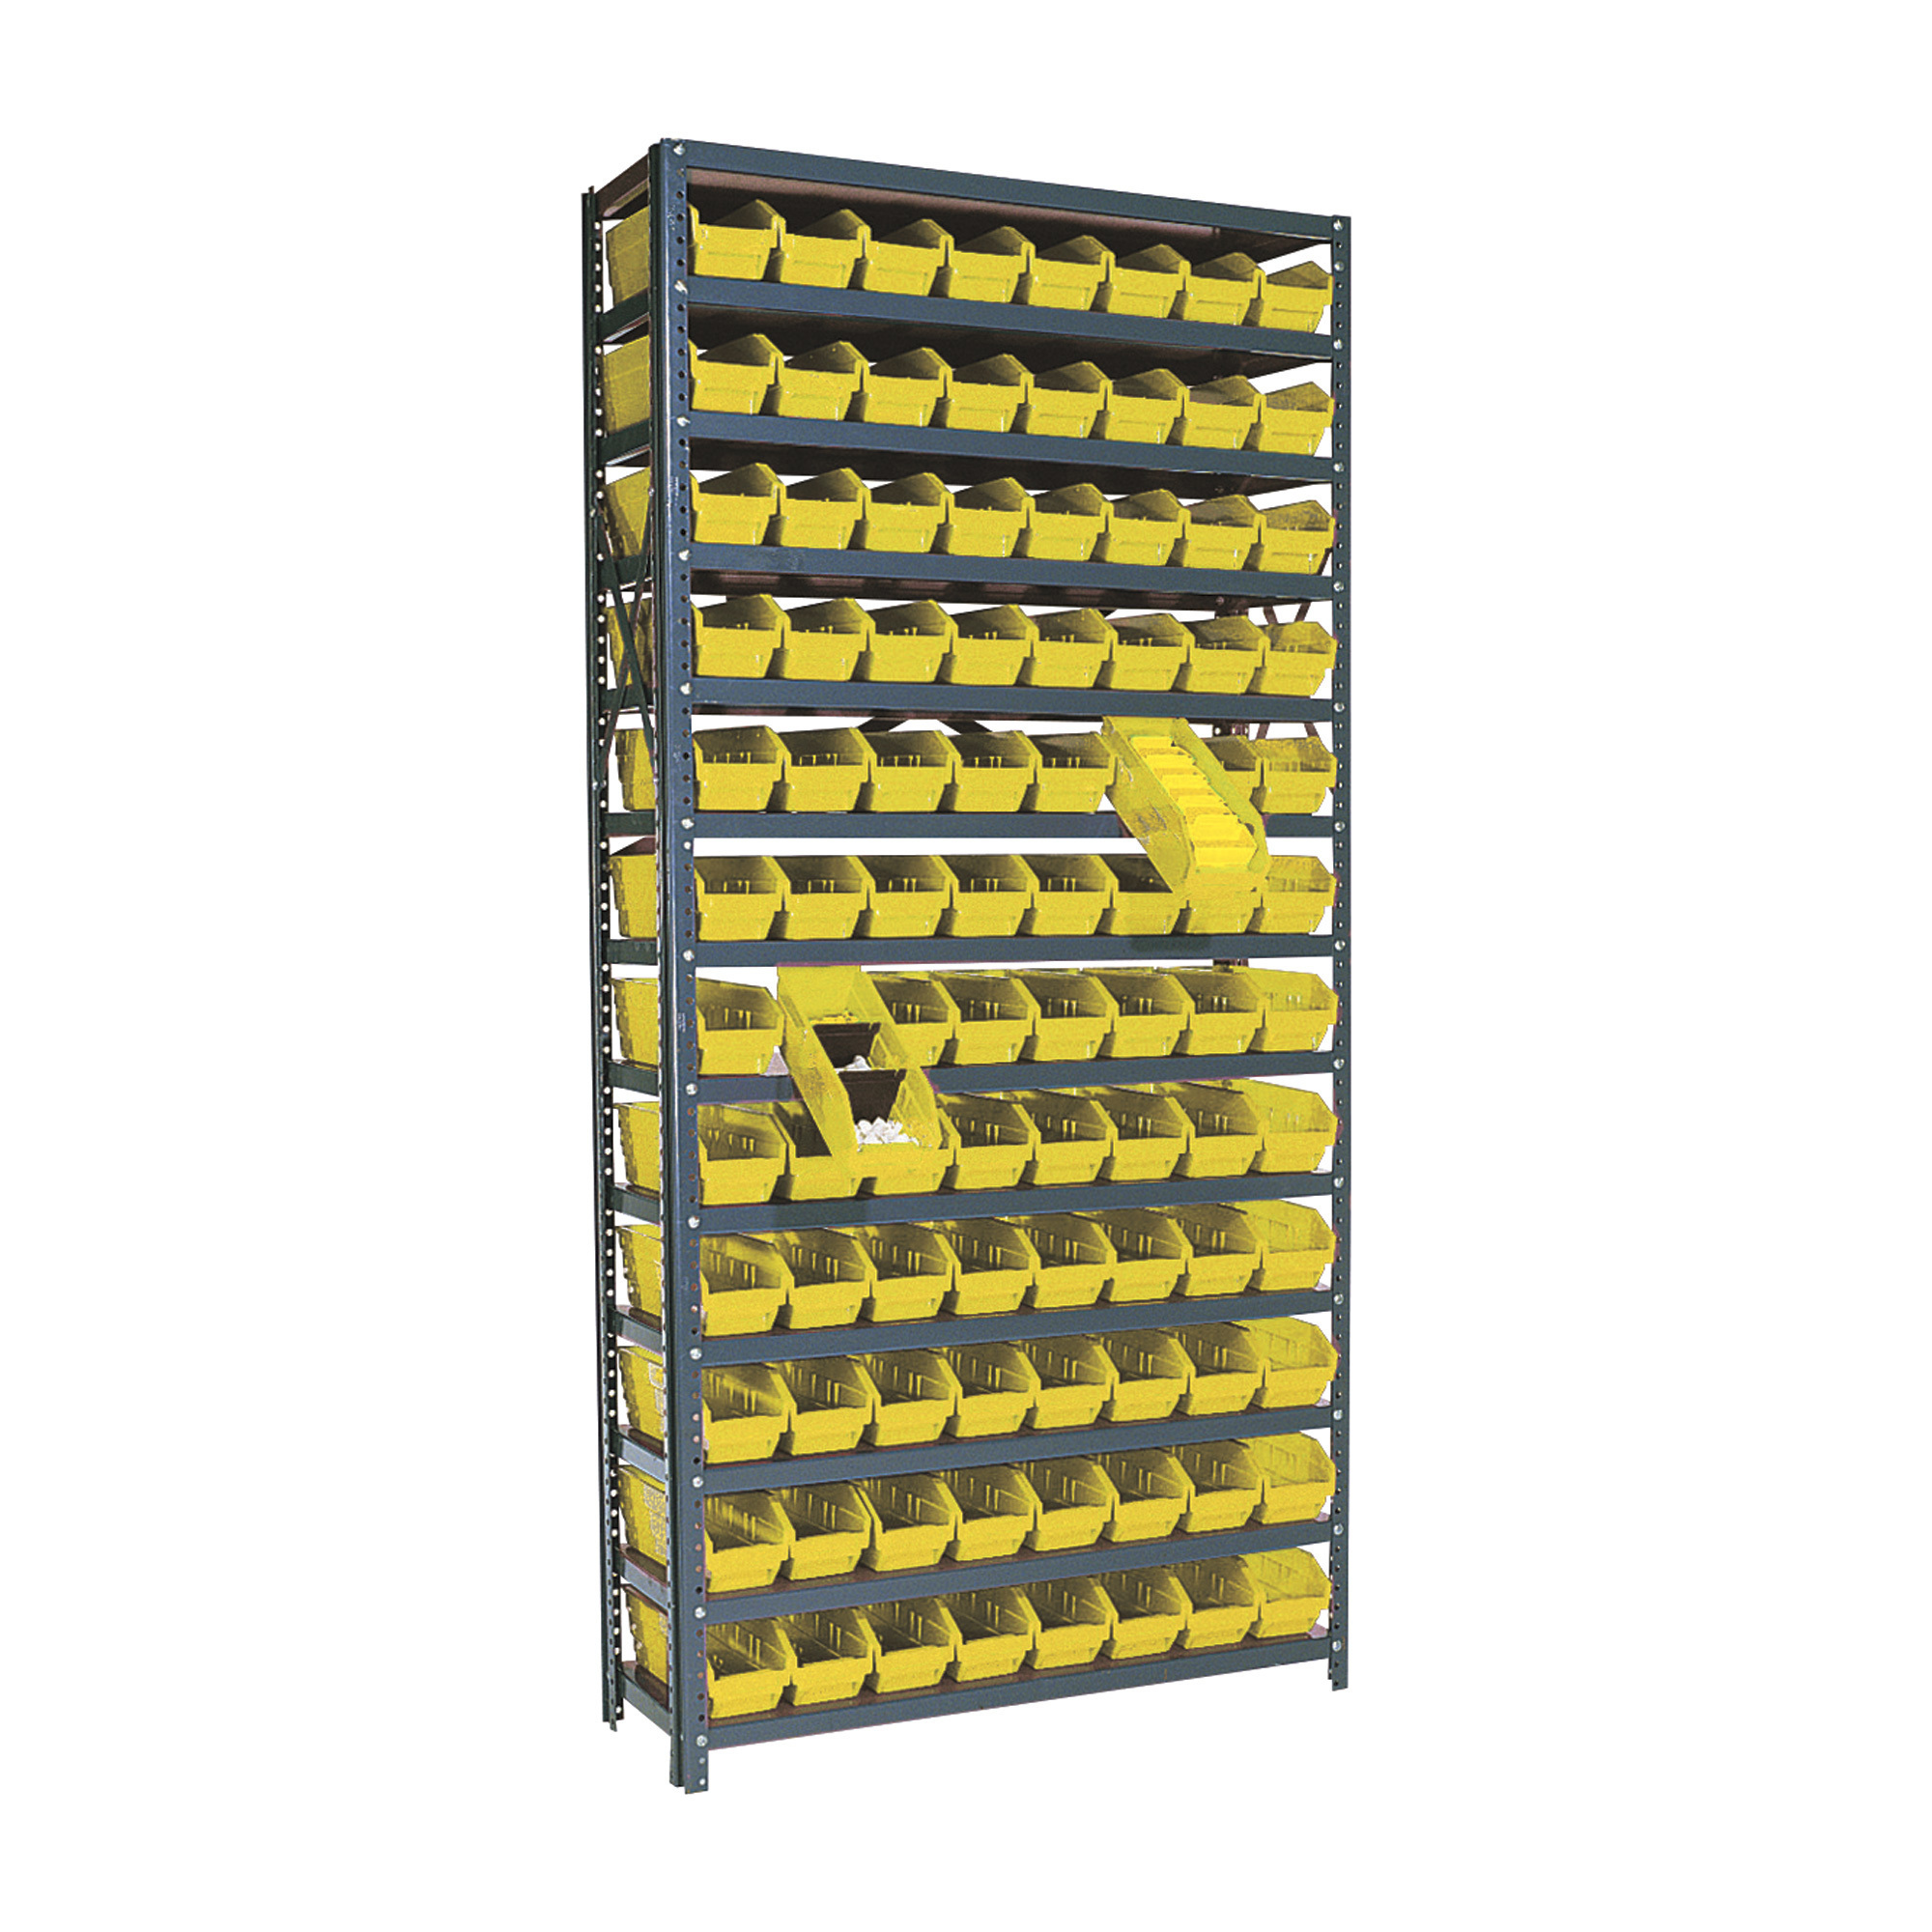 STANLEY Wire Rack for Blade Disposal Container (11-085)